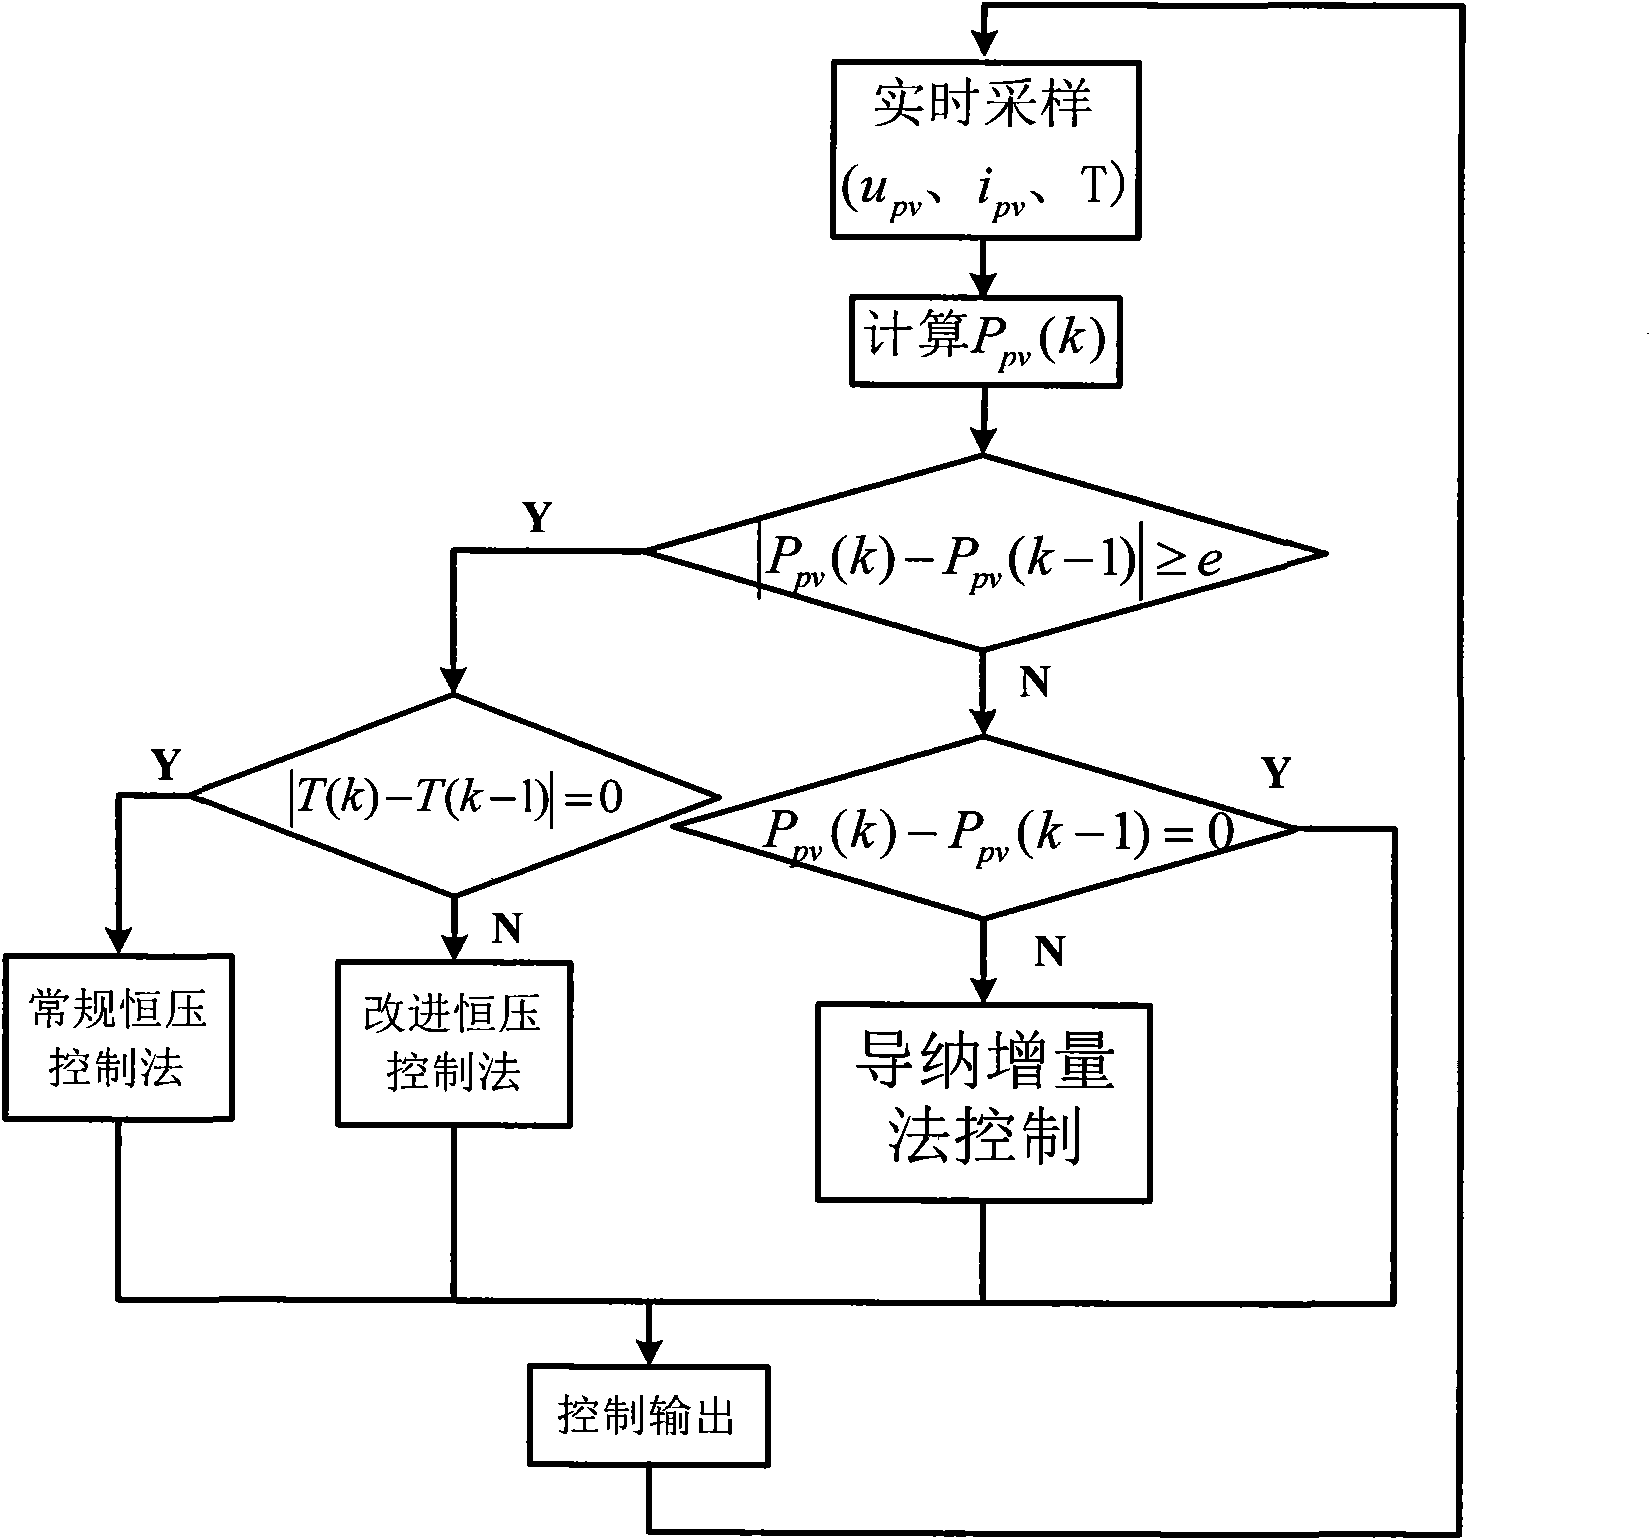 Compound control method for fast and accurate tracking control of maximum power point of photovoltaic power generation system